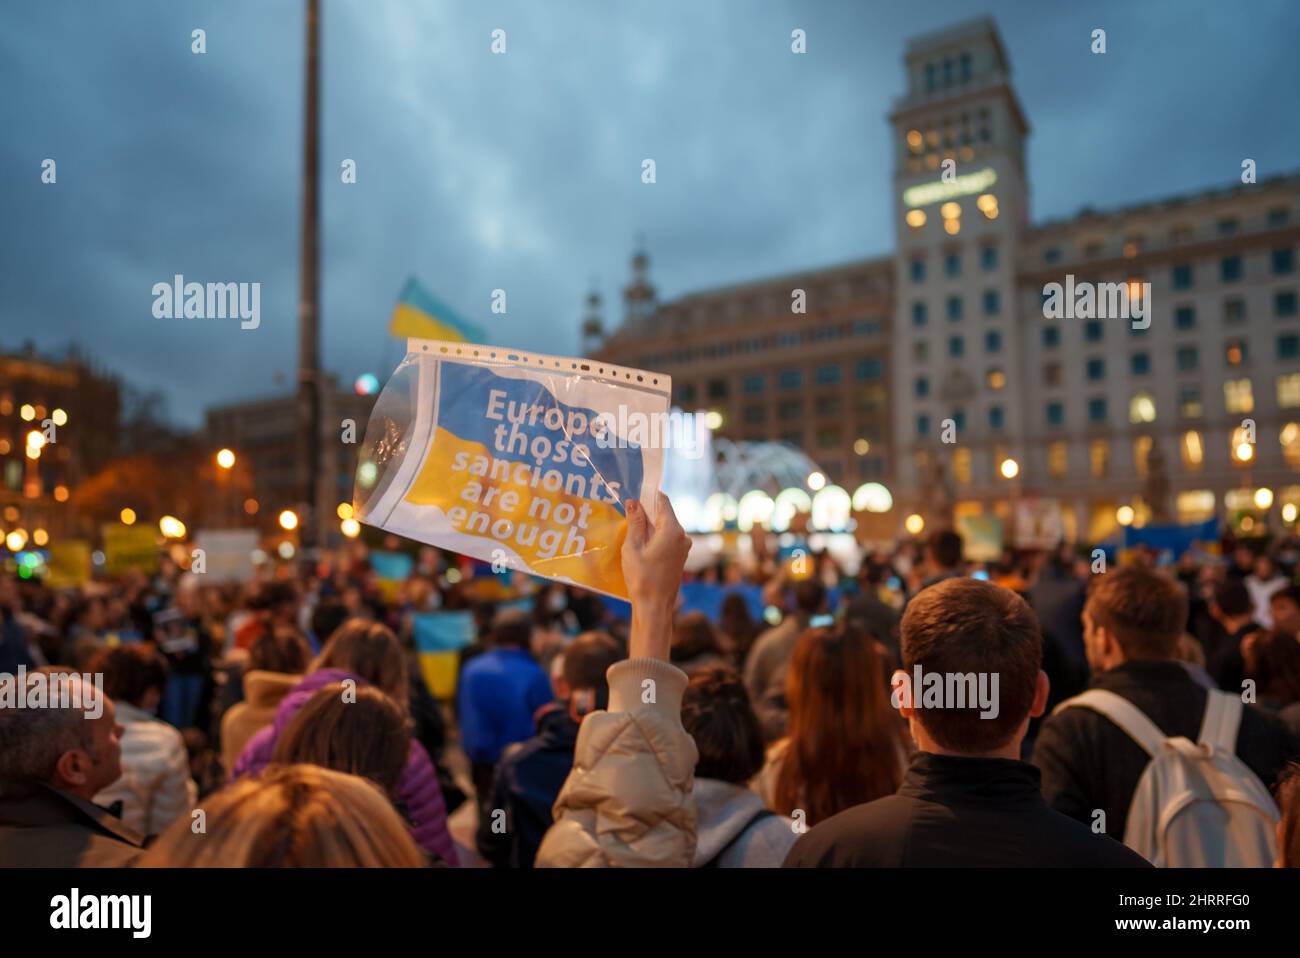 Barcelona, Spain - February 25, 2022: Protest against the war and russian aggressive Vladimir Putin politic. Ukrainians in Spain in defense of Ukraine on plaza Catalunya place. Sign says Europe those sanctions are not enough. Reportage editorial photo from Catalunya Stock Photo